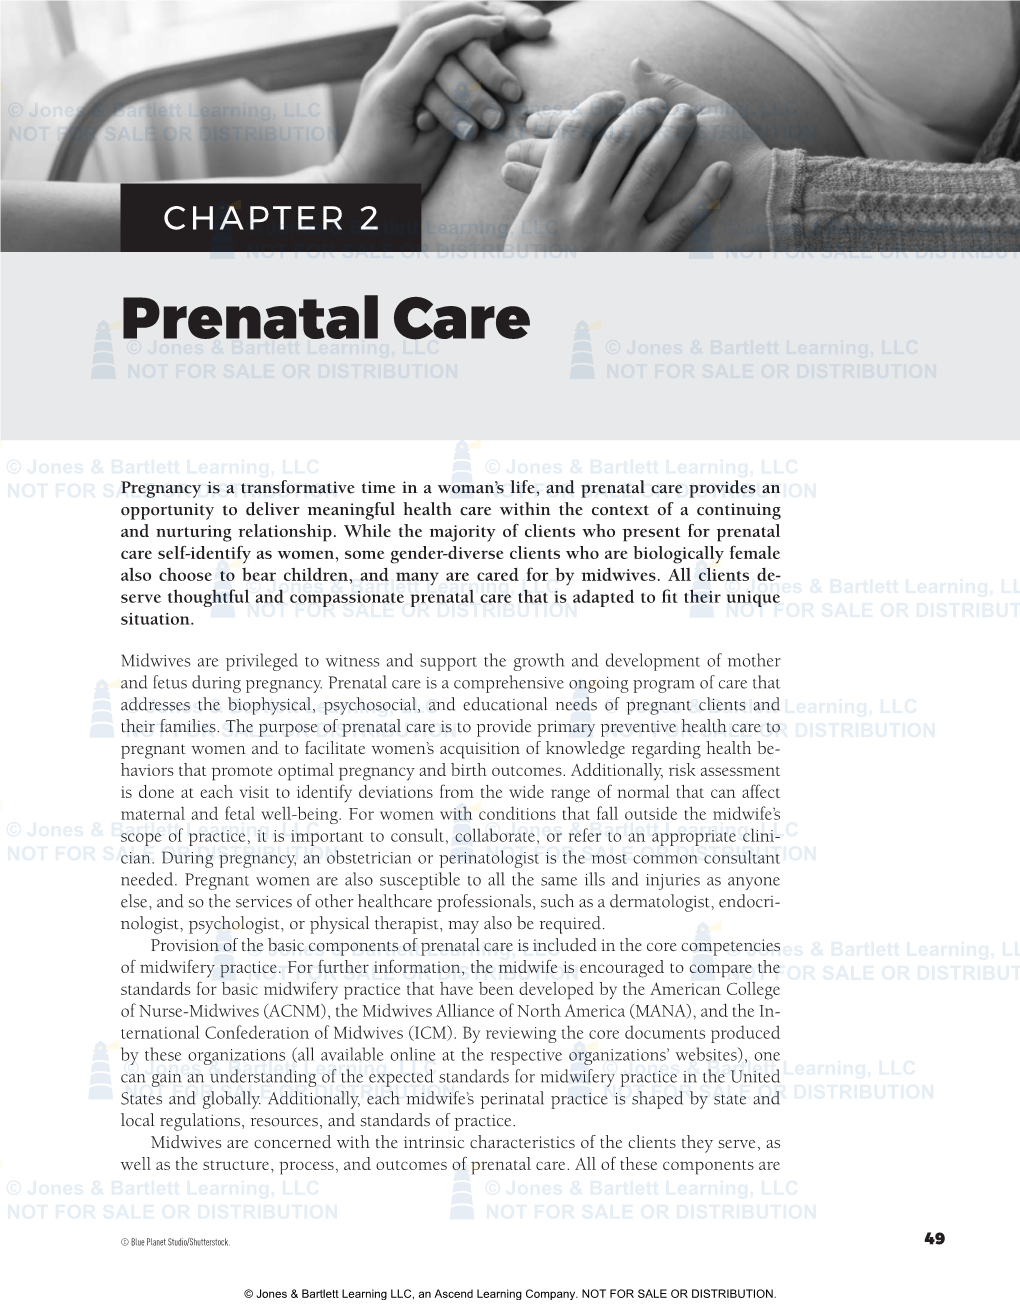 Prenatal Care Self-Identify As Women, Some Gender-Diverse Clients Who Are Biologically Female Also Choose to Bear Children, and Many Are Cared for by Midwives